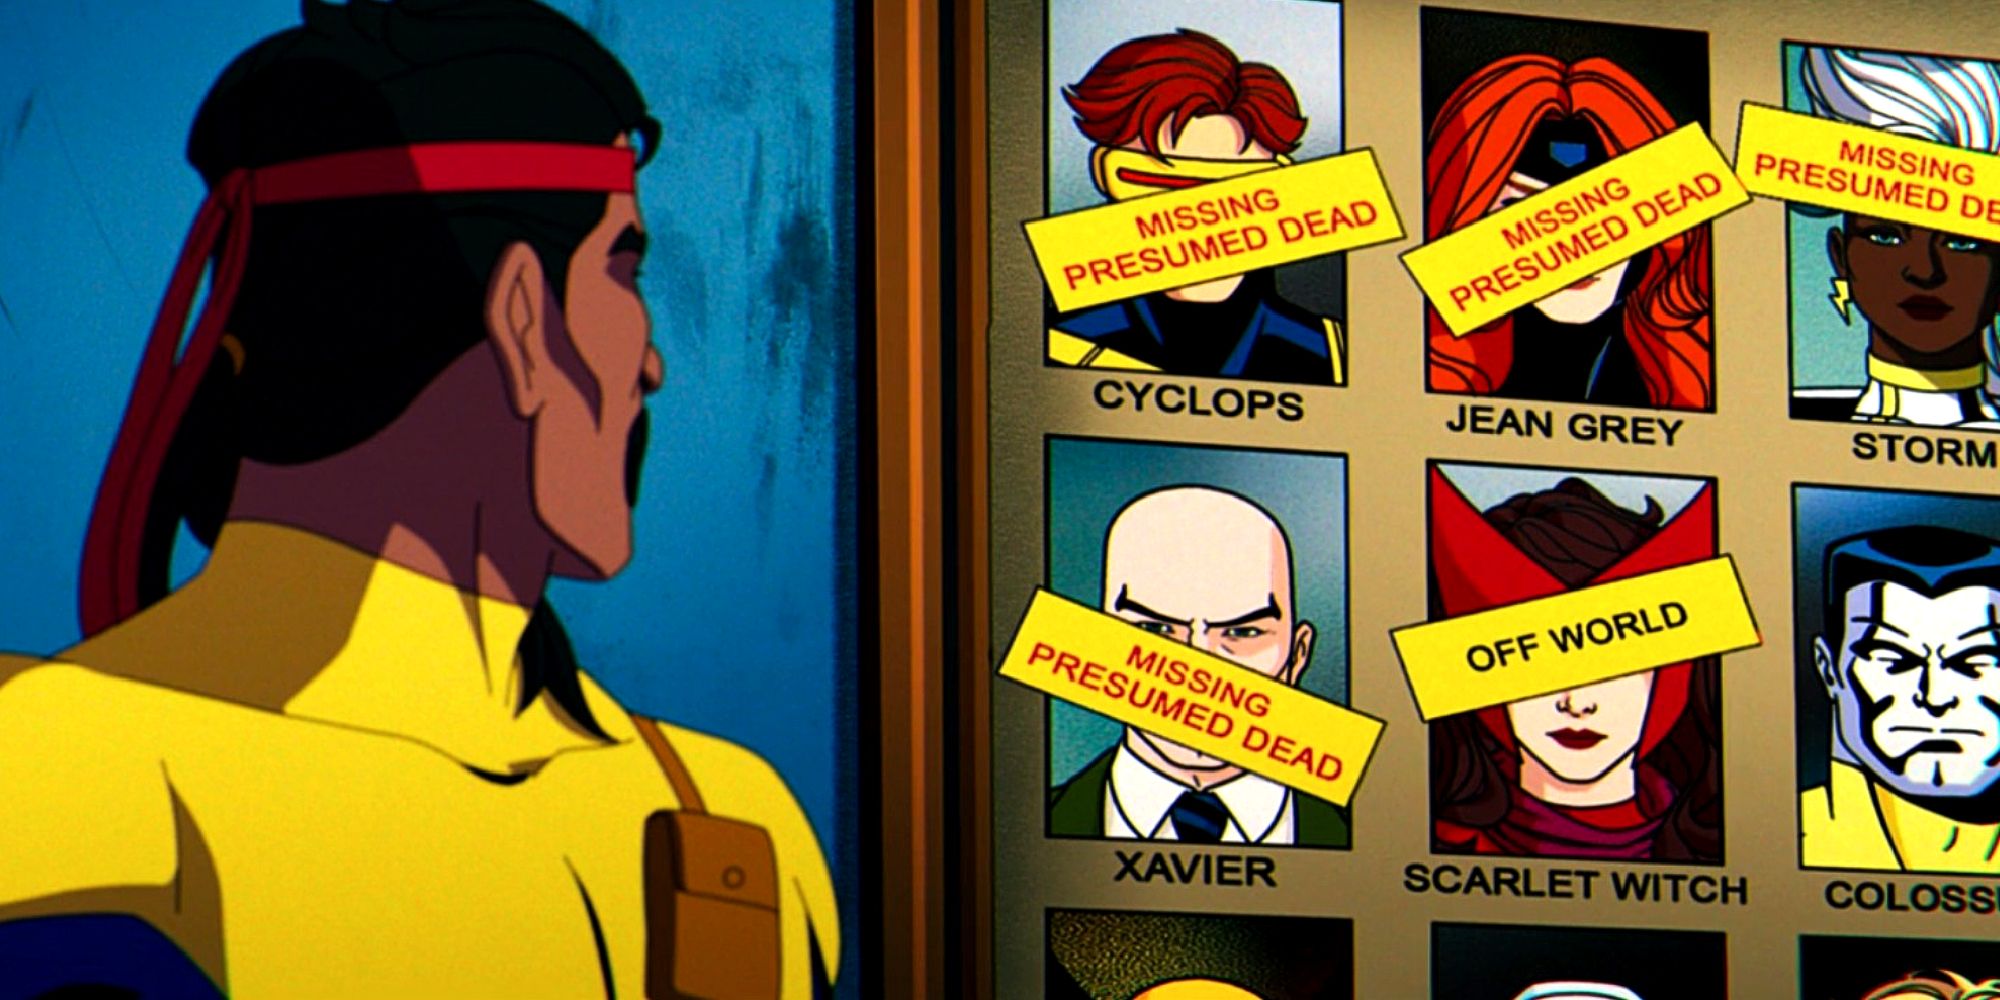 Forge Looks at the Missing Mutants Board in X-Men 97 Episode 10 Ending